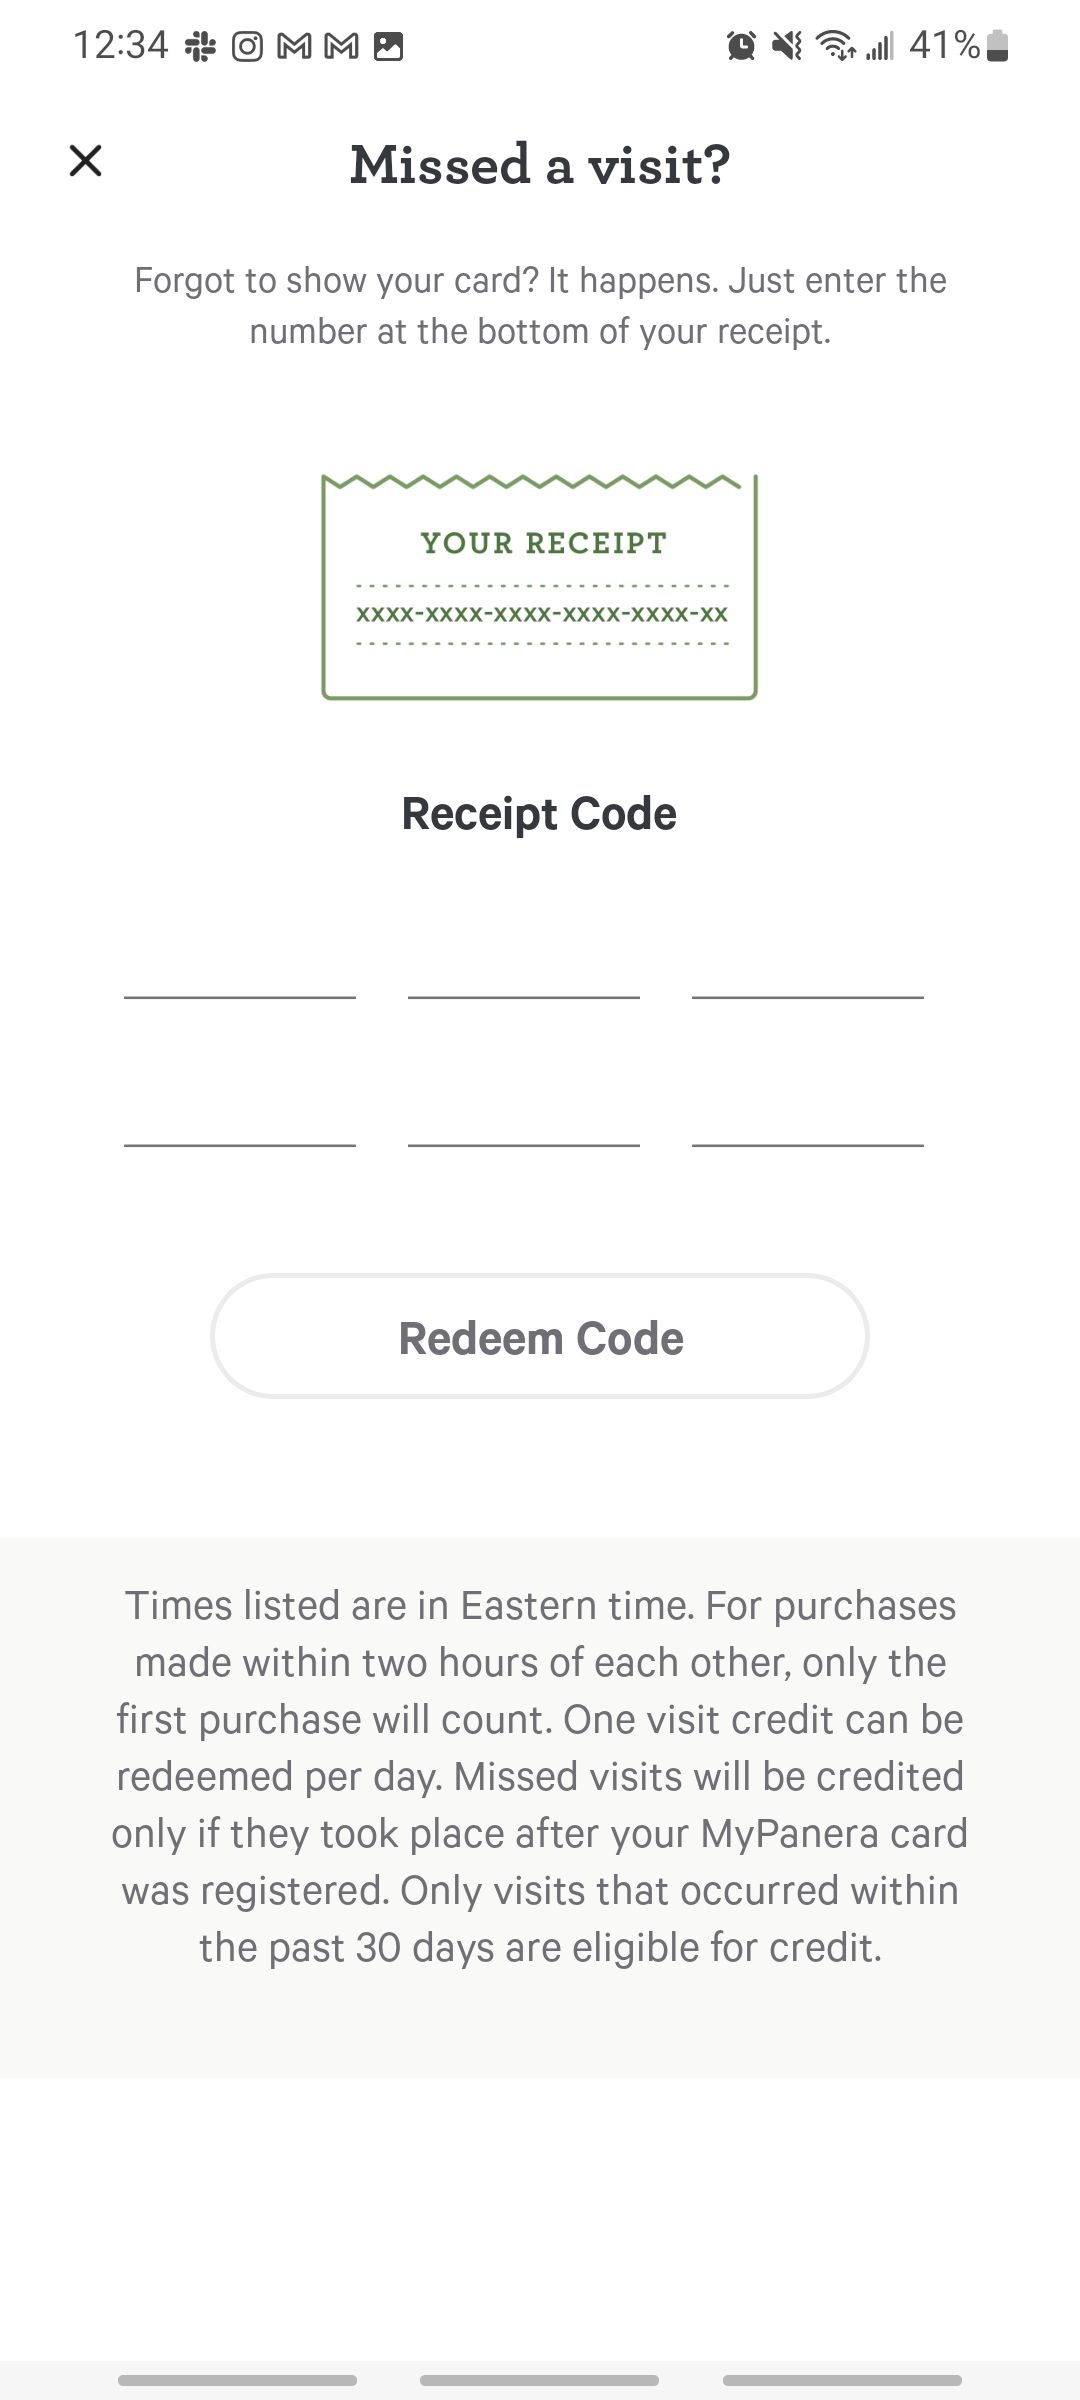 panera app letting you input receipt code if you missed rewards